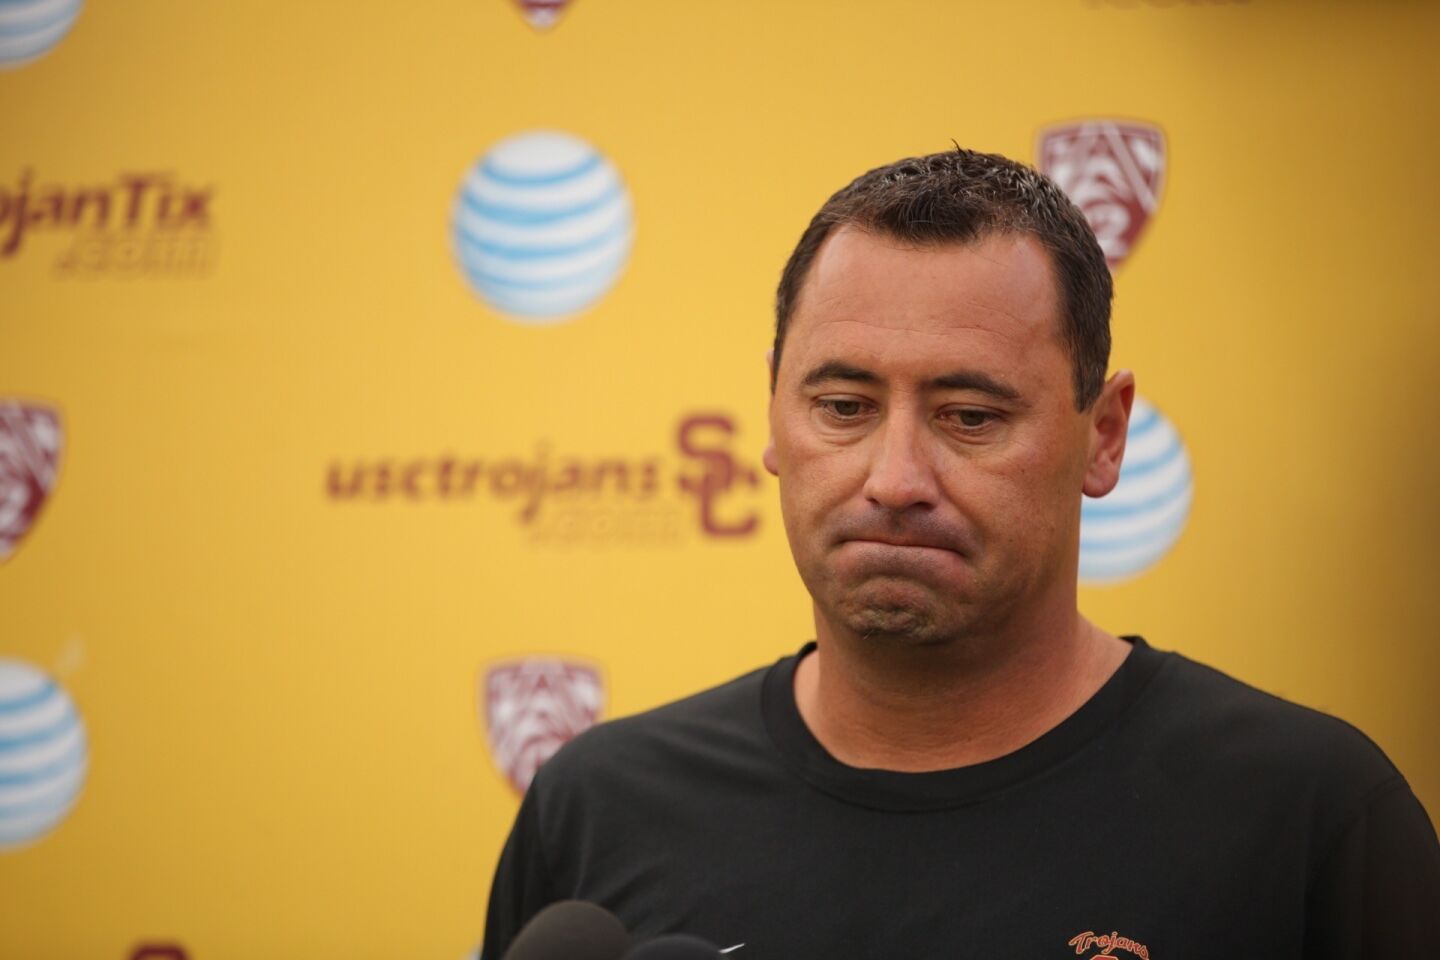 USC football Coach Steve Sarkisian addresses the media on Aug. 25, 2015, about his behavior and language during a booster event on campus days earlier